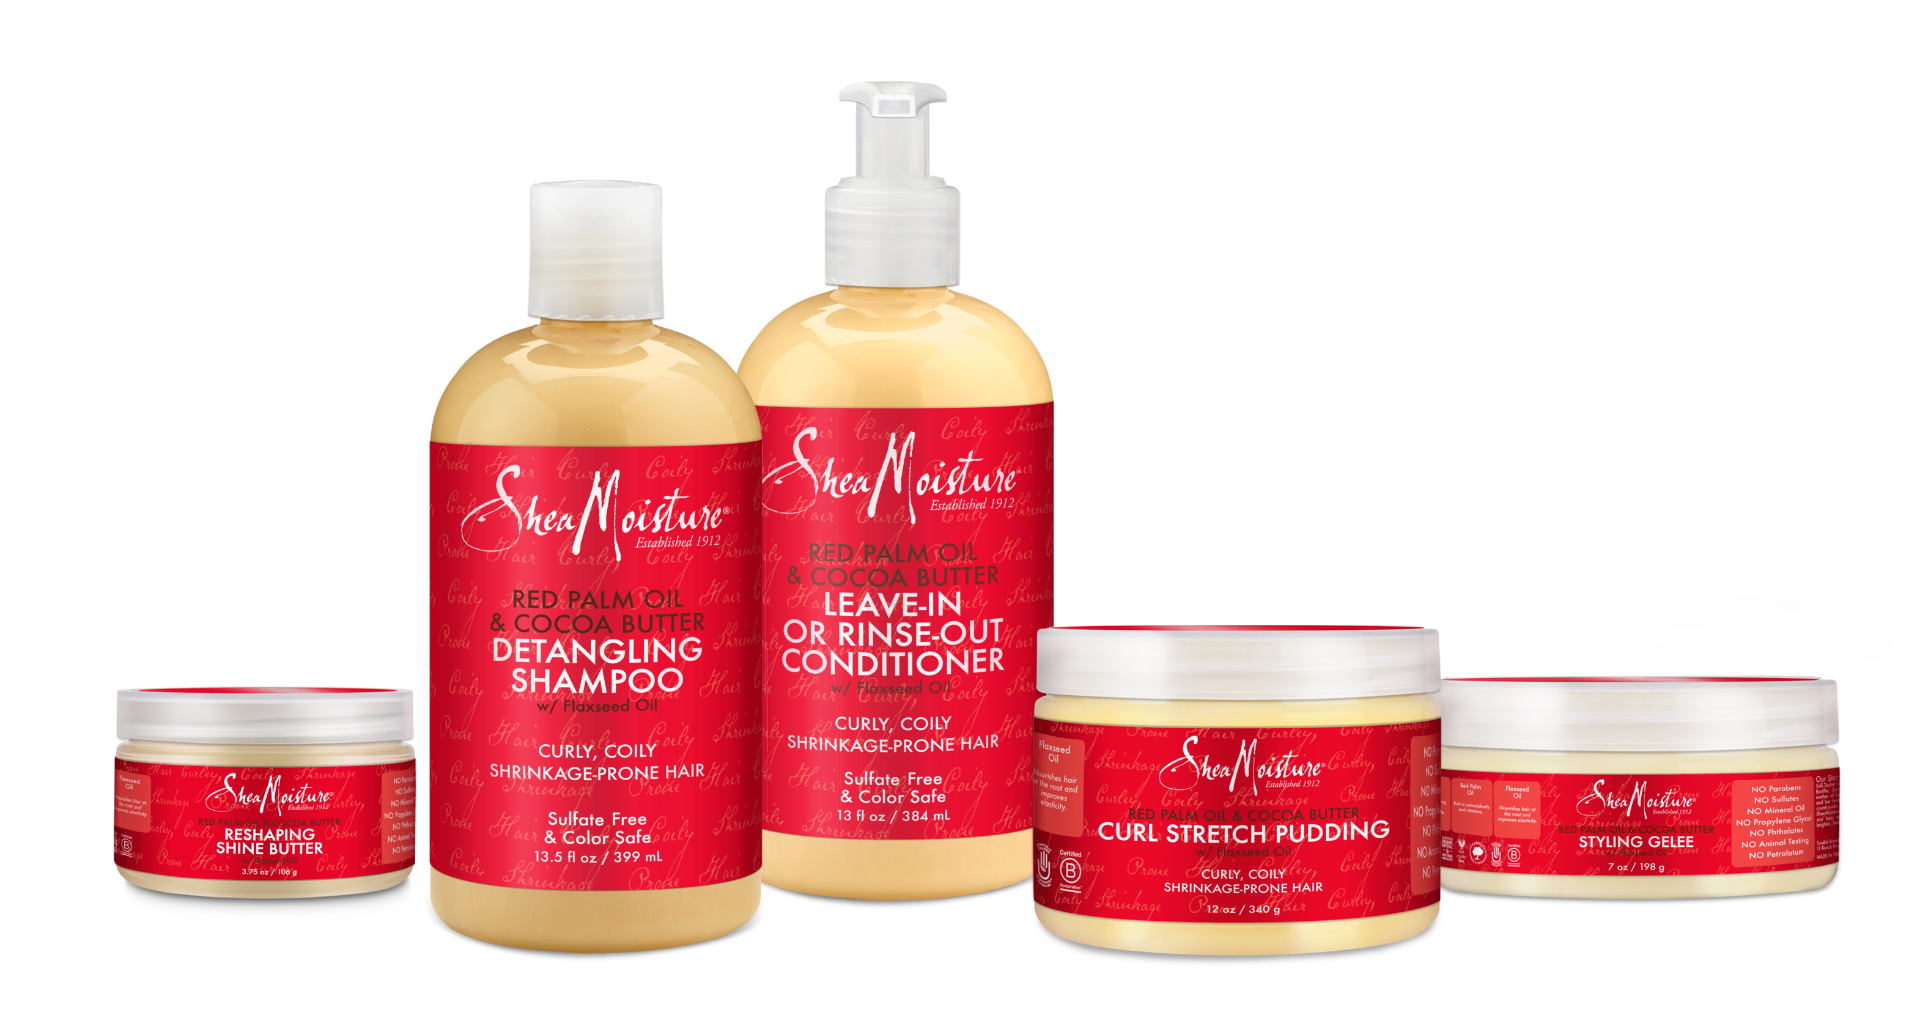 Shea Moisture Red Palm Oil & Cocoa Butter